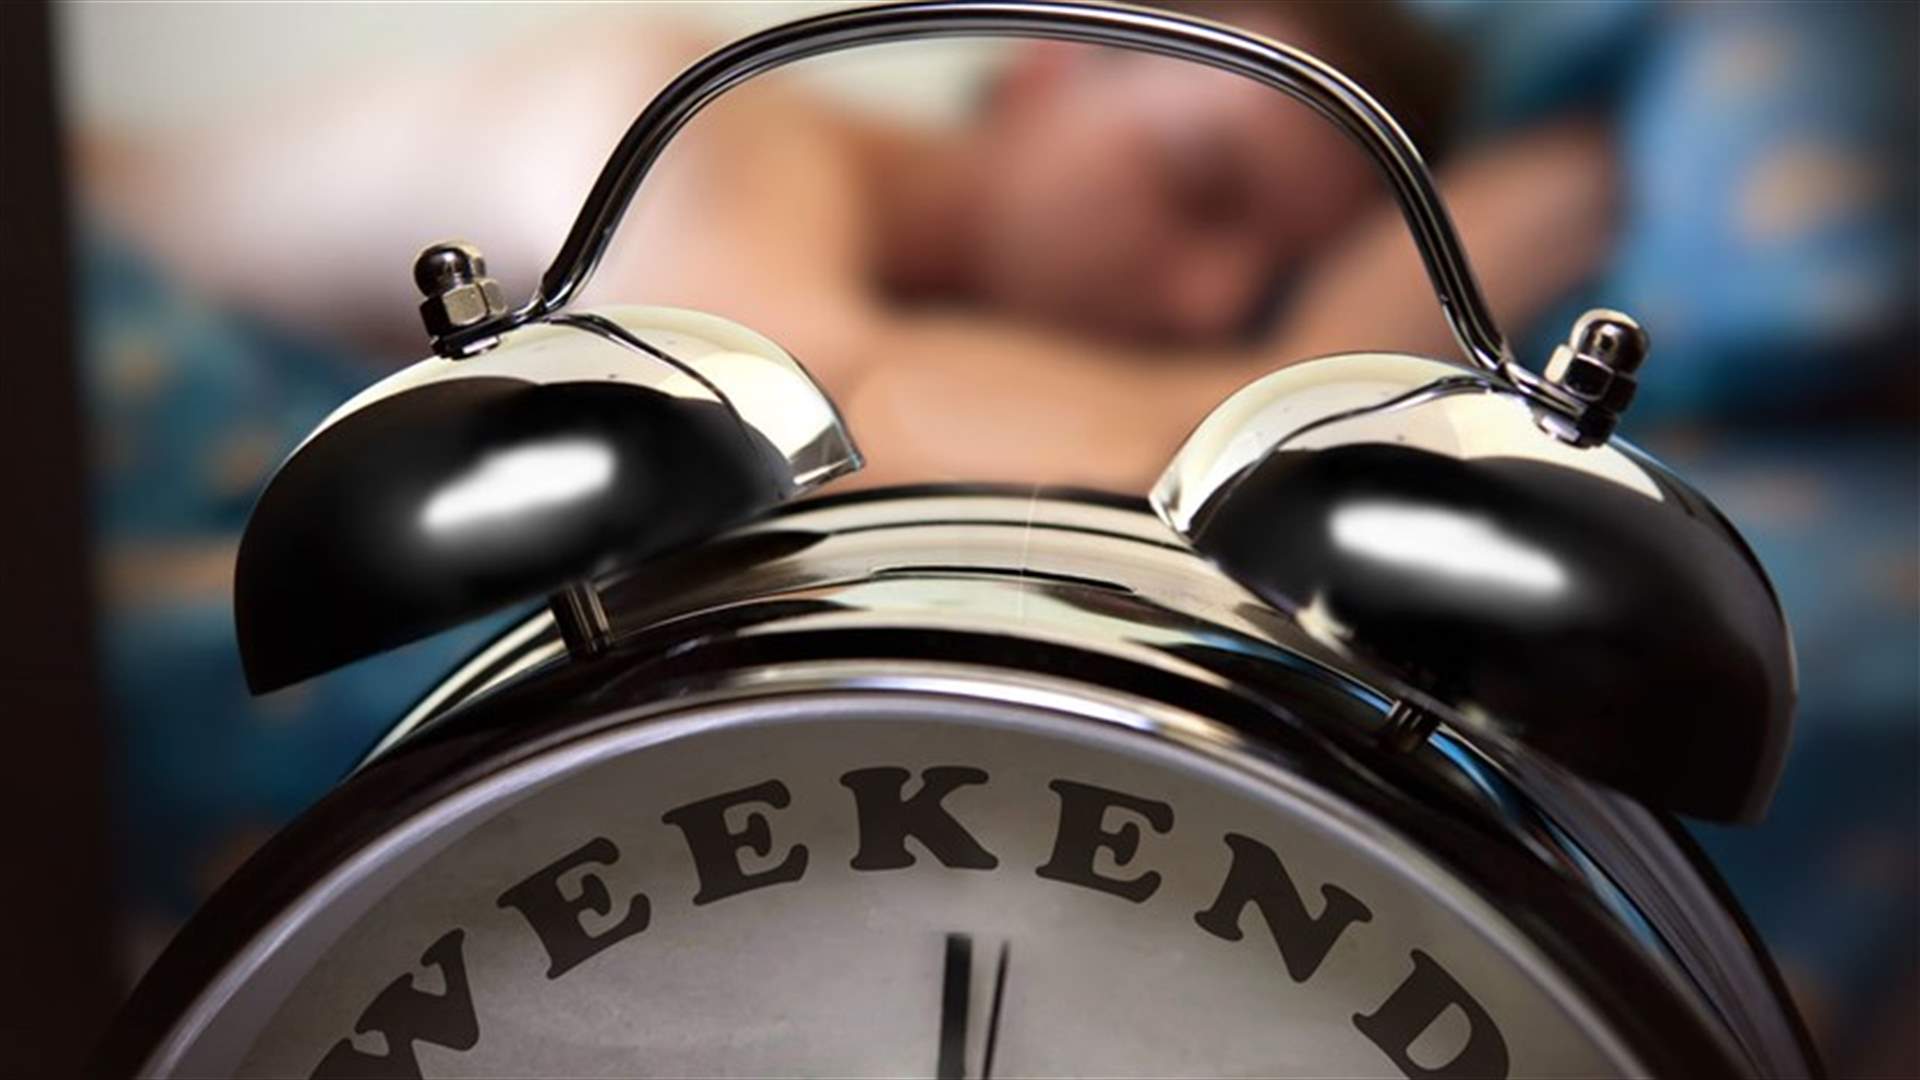 Sleeping-In On Weekends Linked To Lower Body Weight